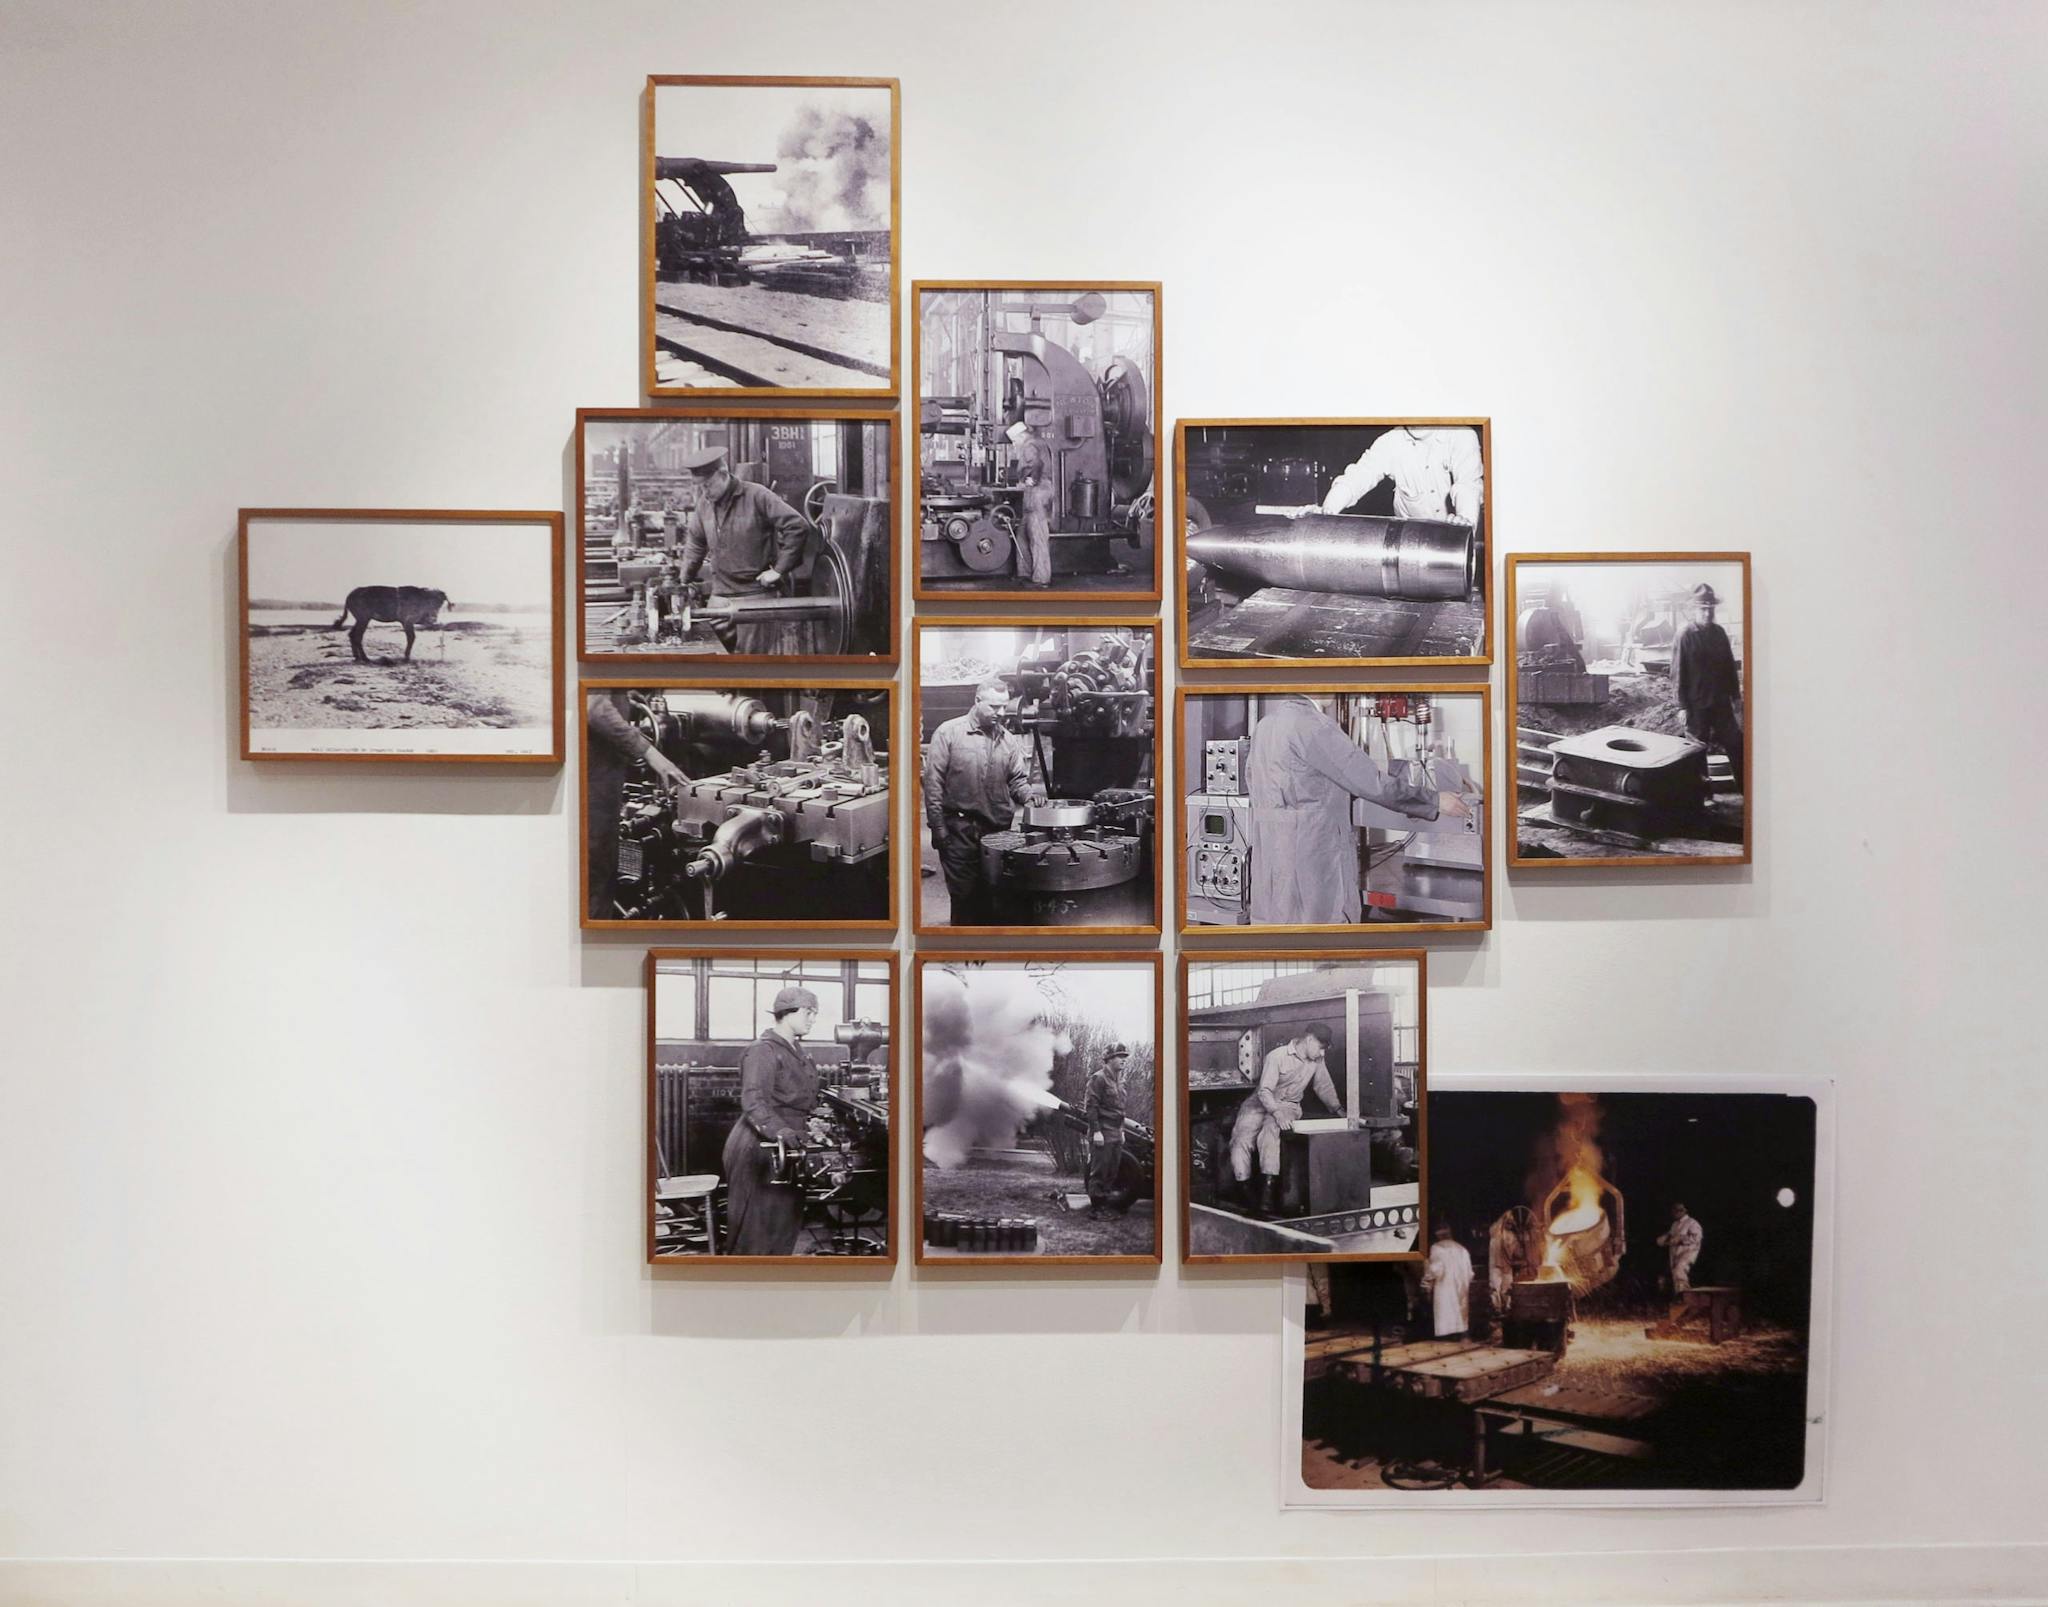 Twelve photographs are assembled on the wall, with a loose print appearing at the bottom of the scene.